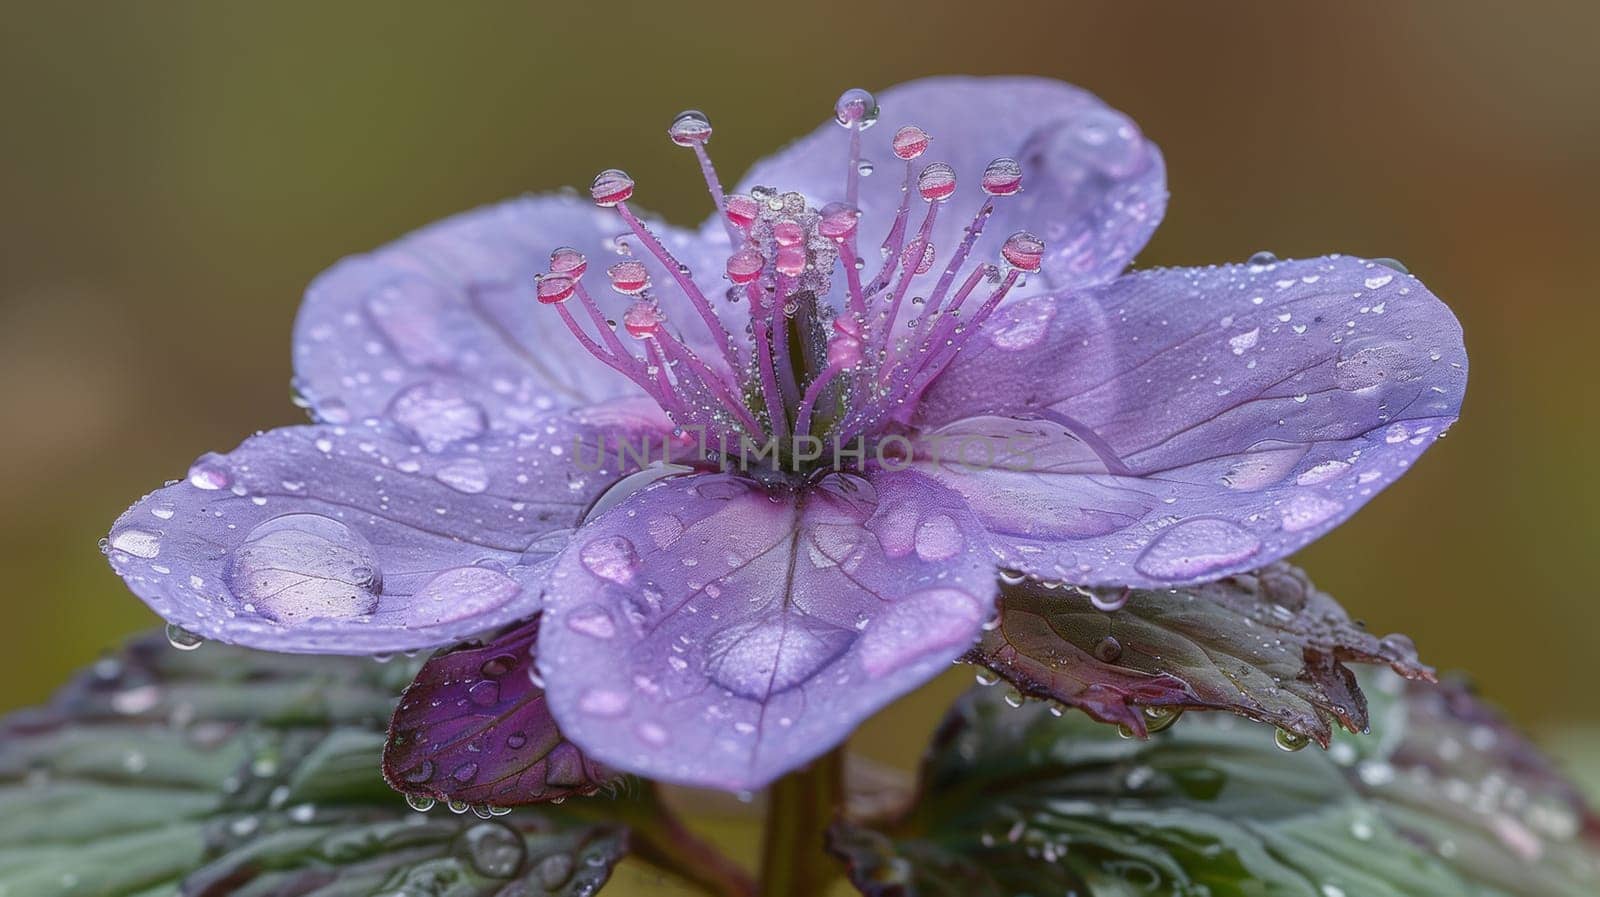 A purple flower with raindrops on it sitting in a green leafy background, AI by starush